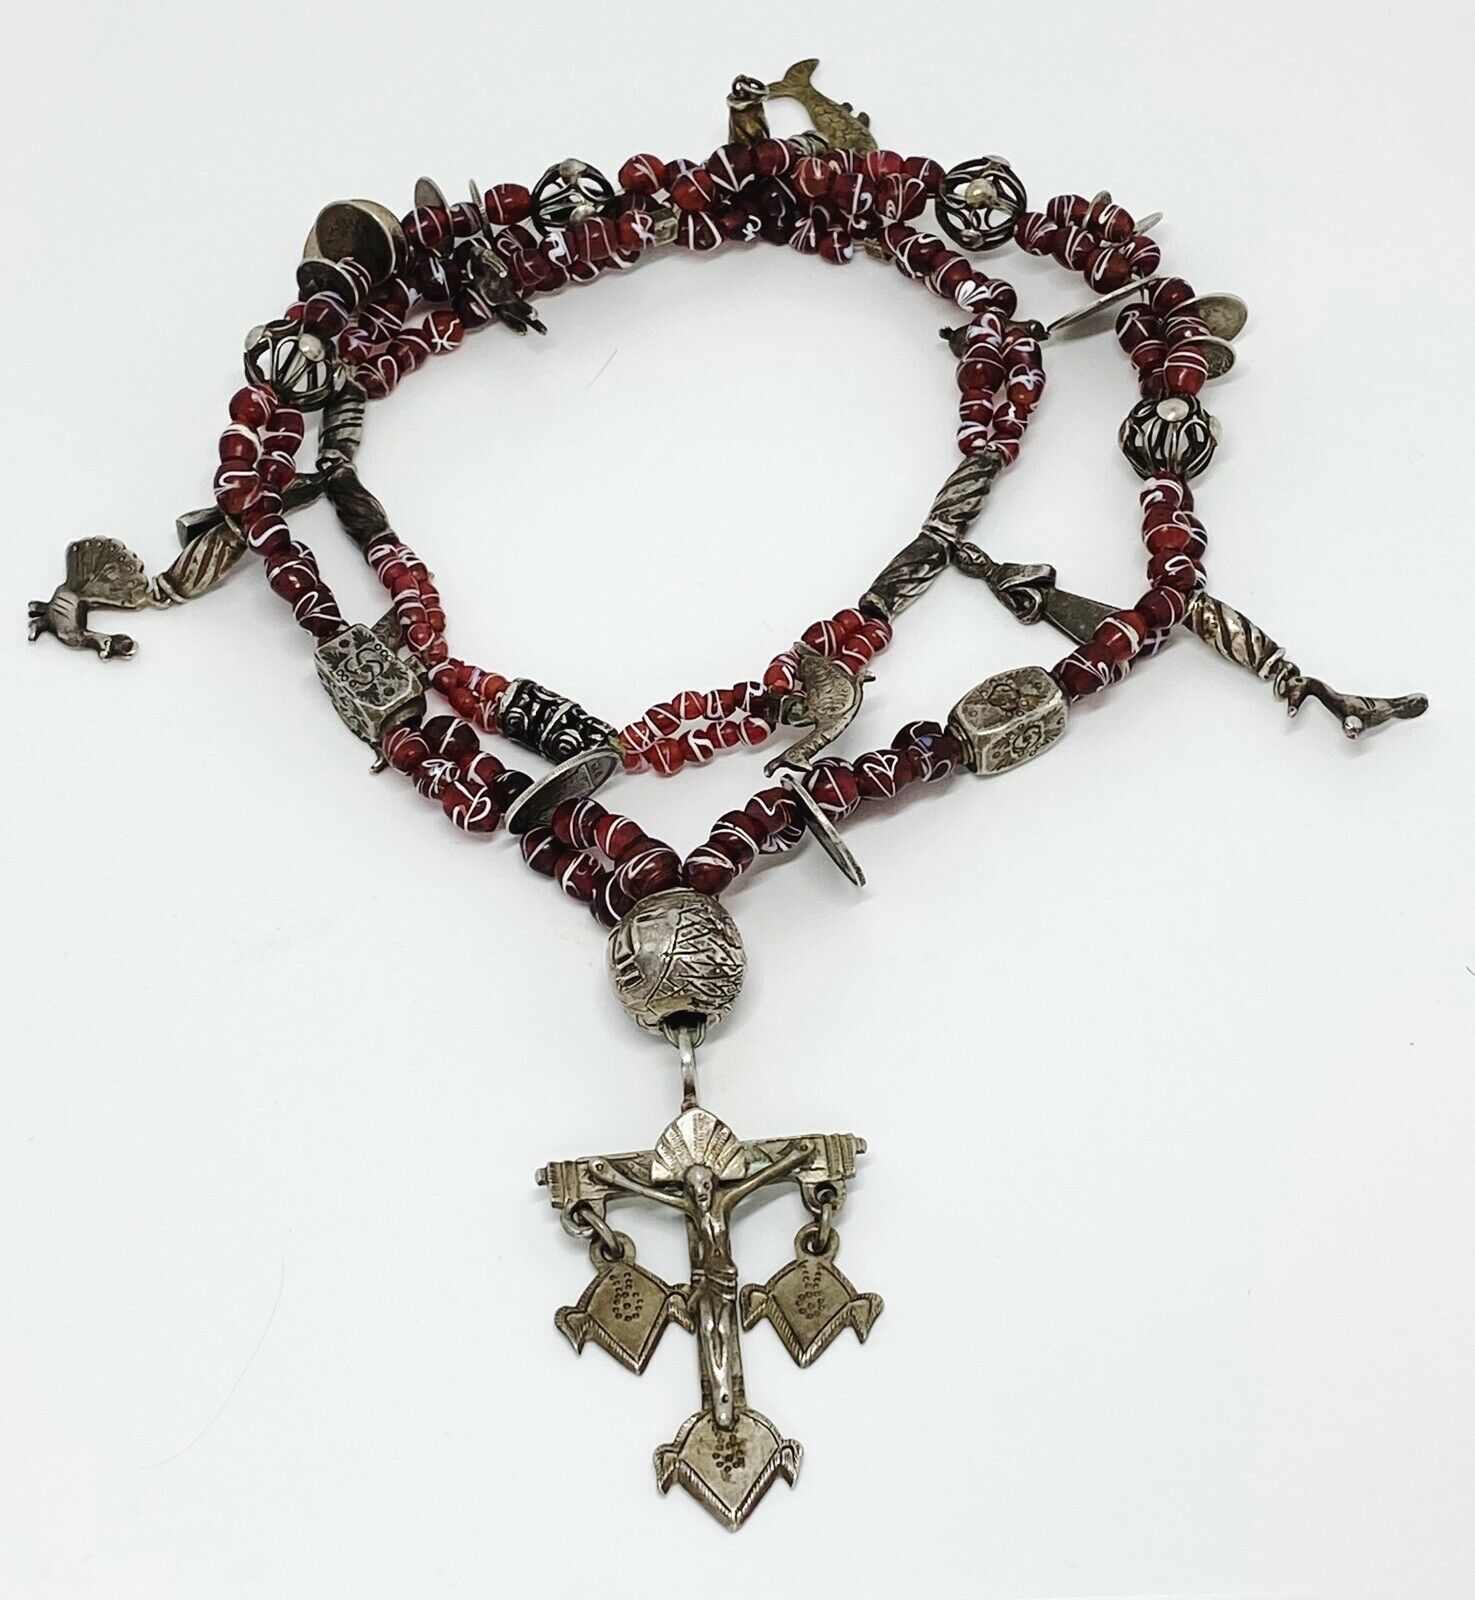 Antique_Guatemalan_Chachal_S.Silver_Necklace_1800’s_Coins_Red_Glass_Beads_Cross_1.jpg (240.0 KB)